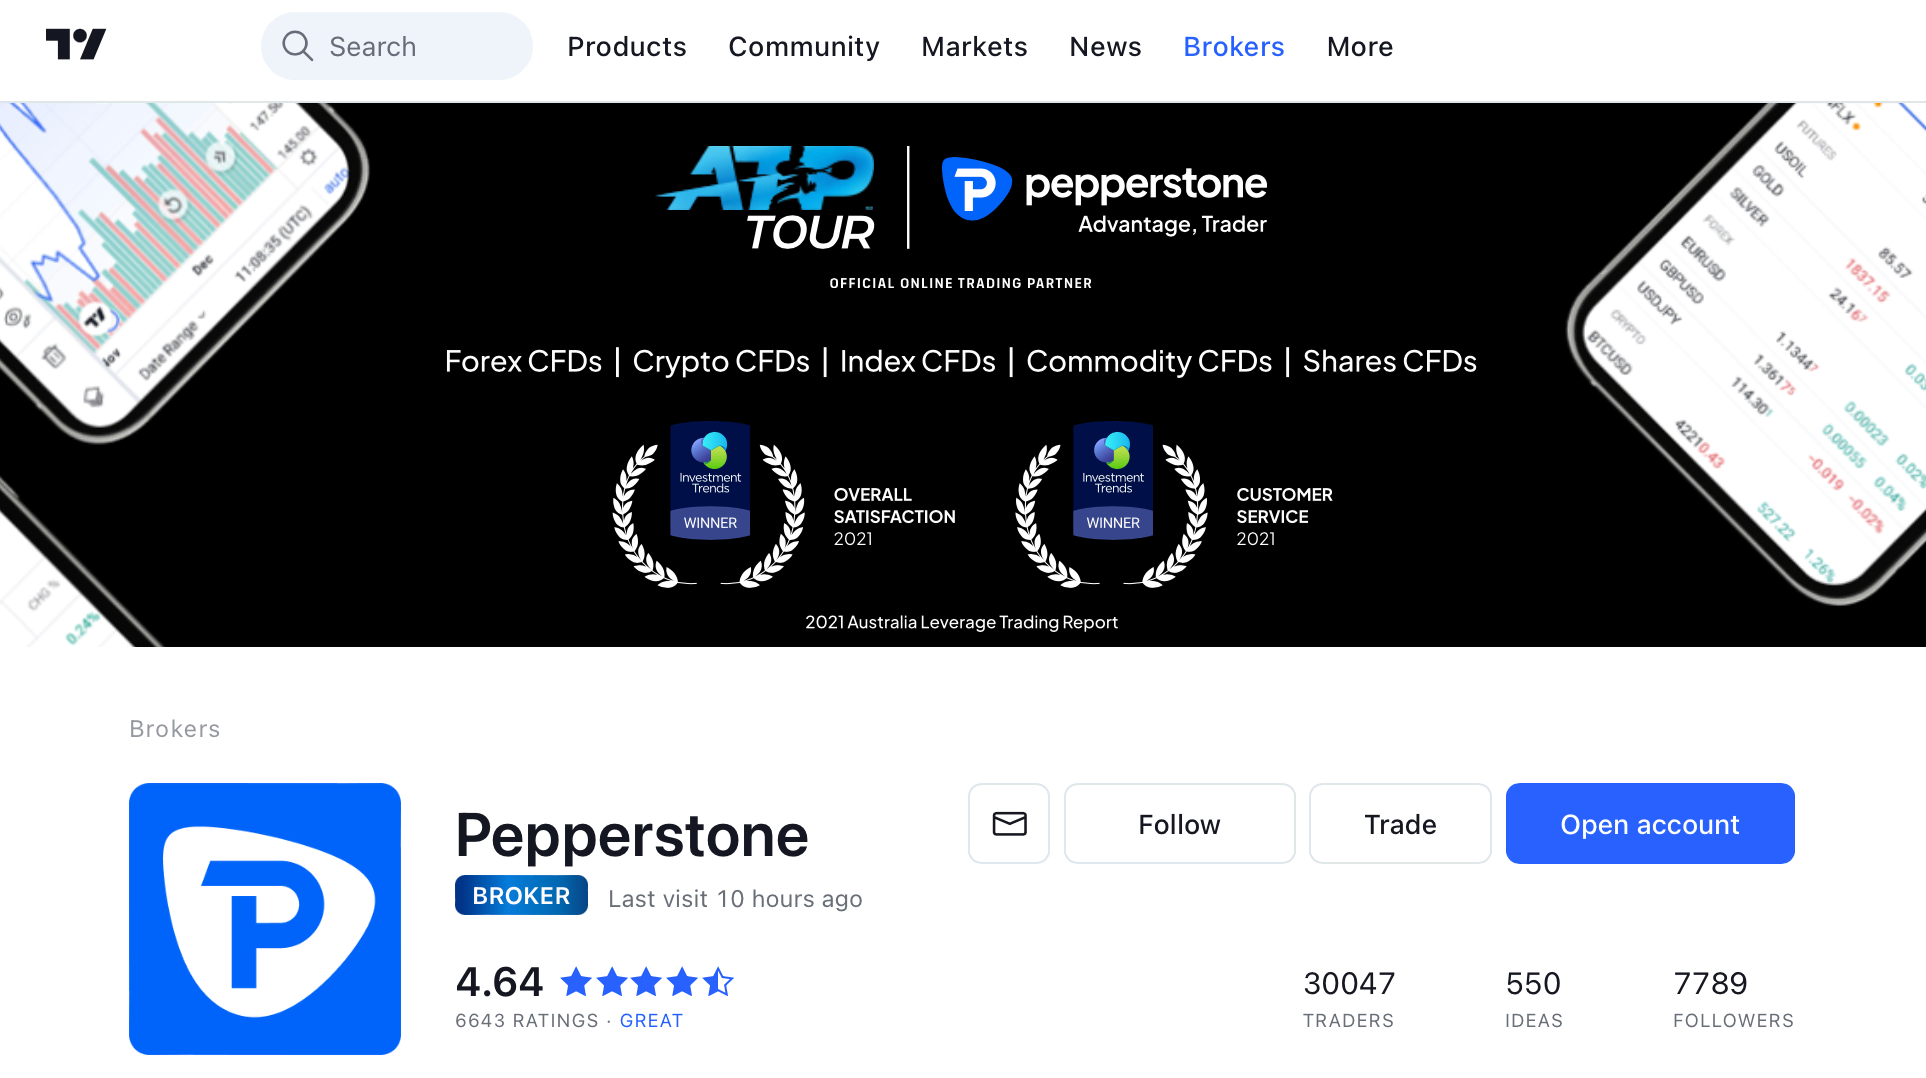 The broker Pepperstone on TradingView